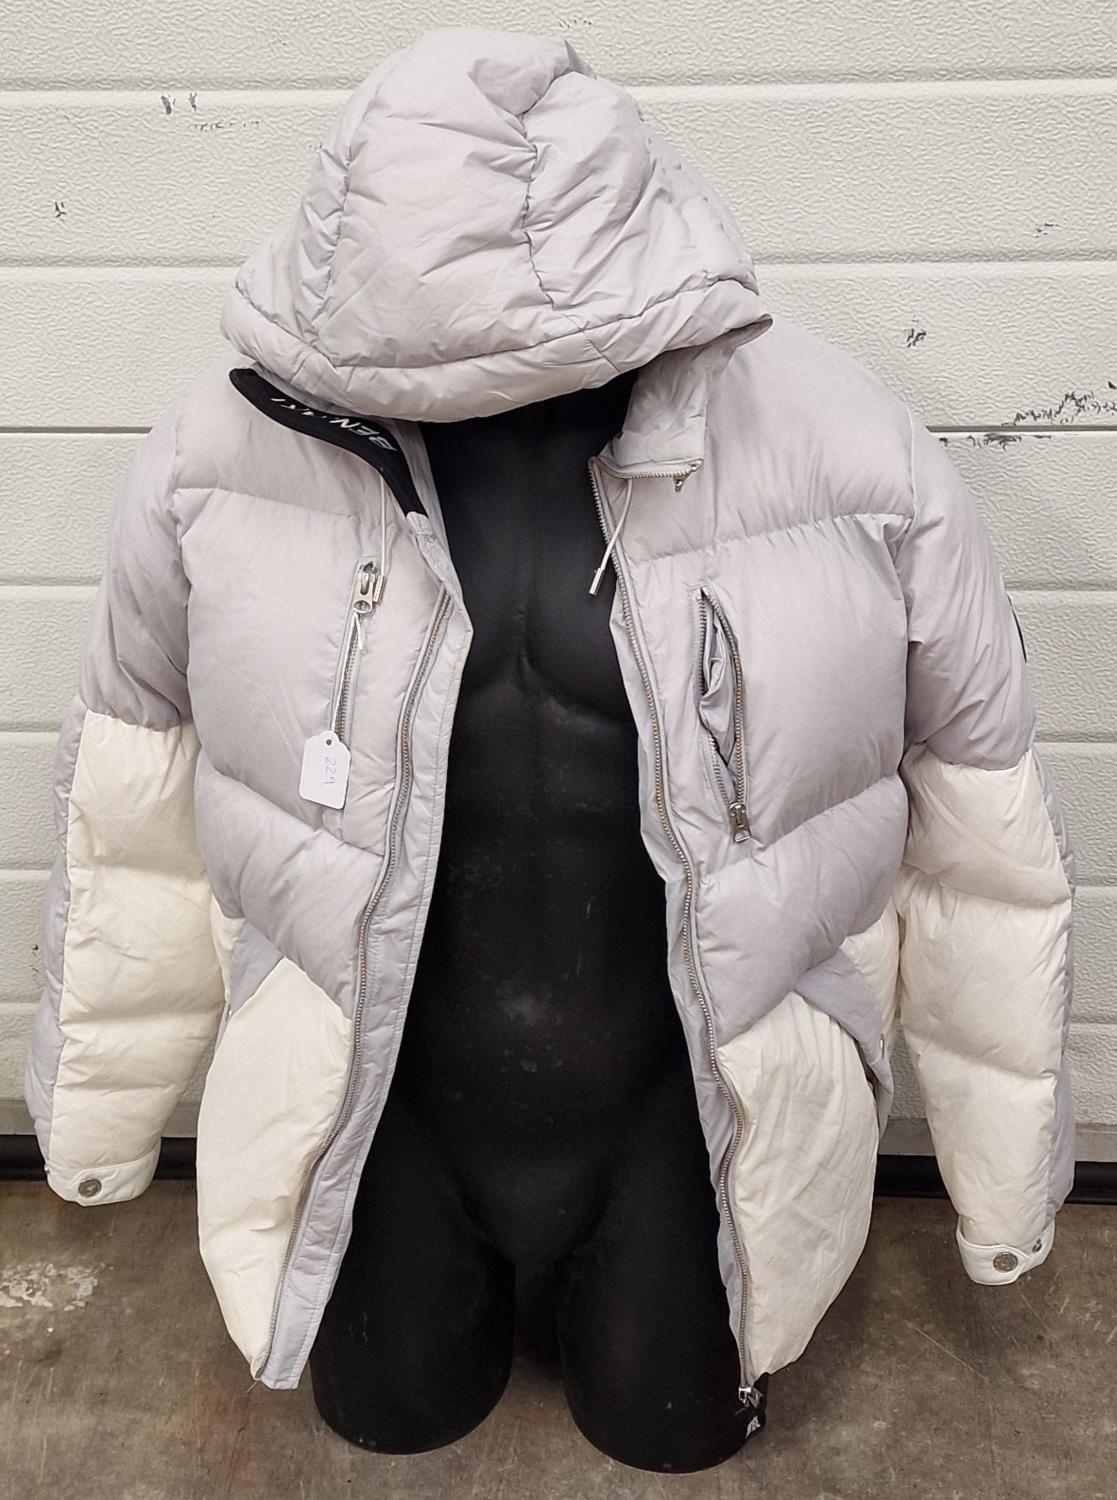 Mens grey and white Benjart puffer jacket size M (REF 229).